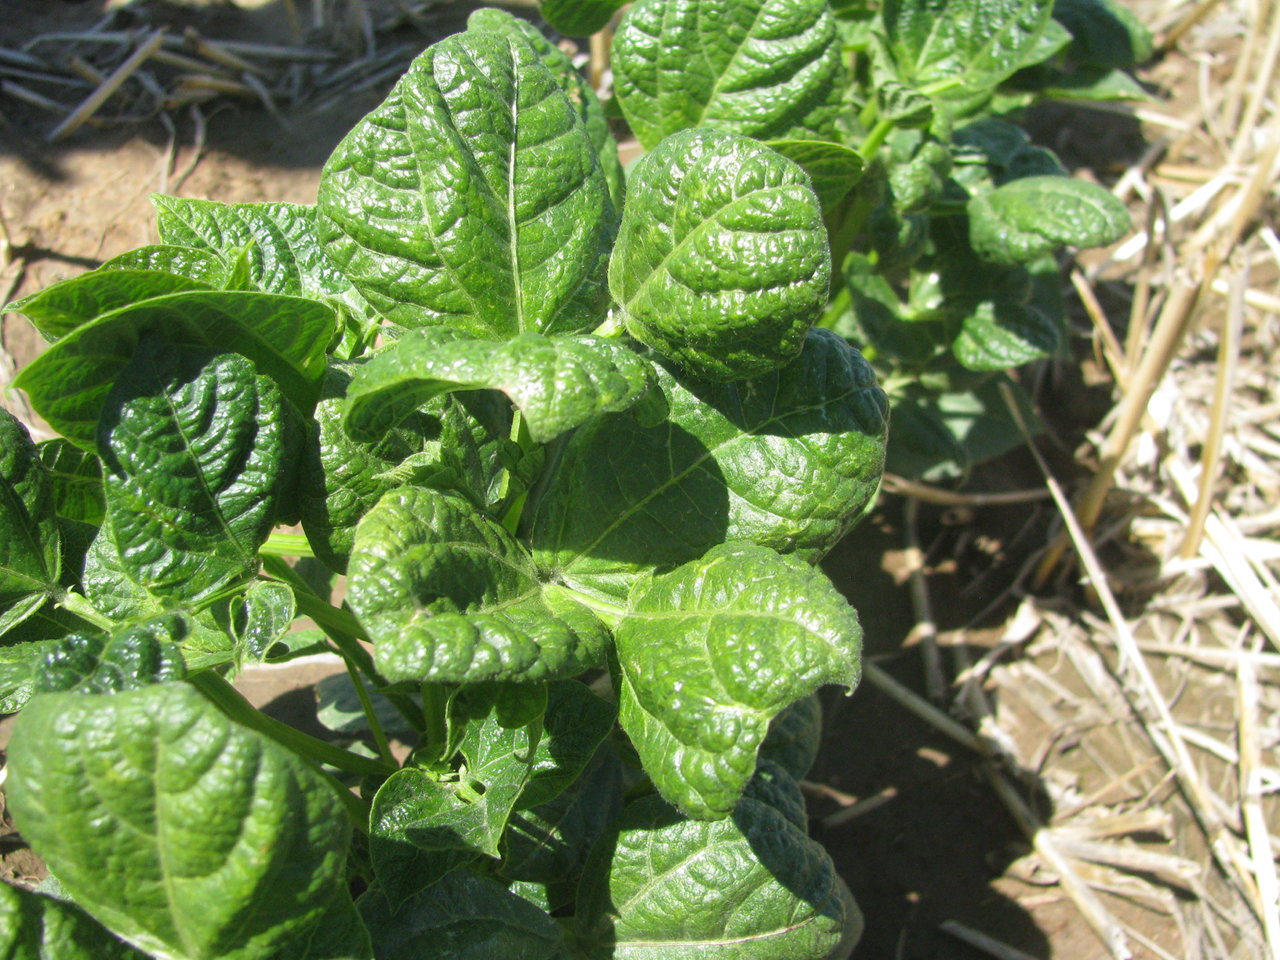 Downward cupping of bean leaves and other leaf distortion as a result of severe thrips infestation.